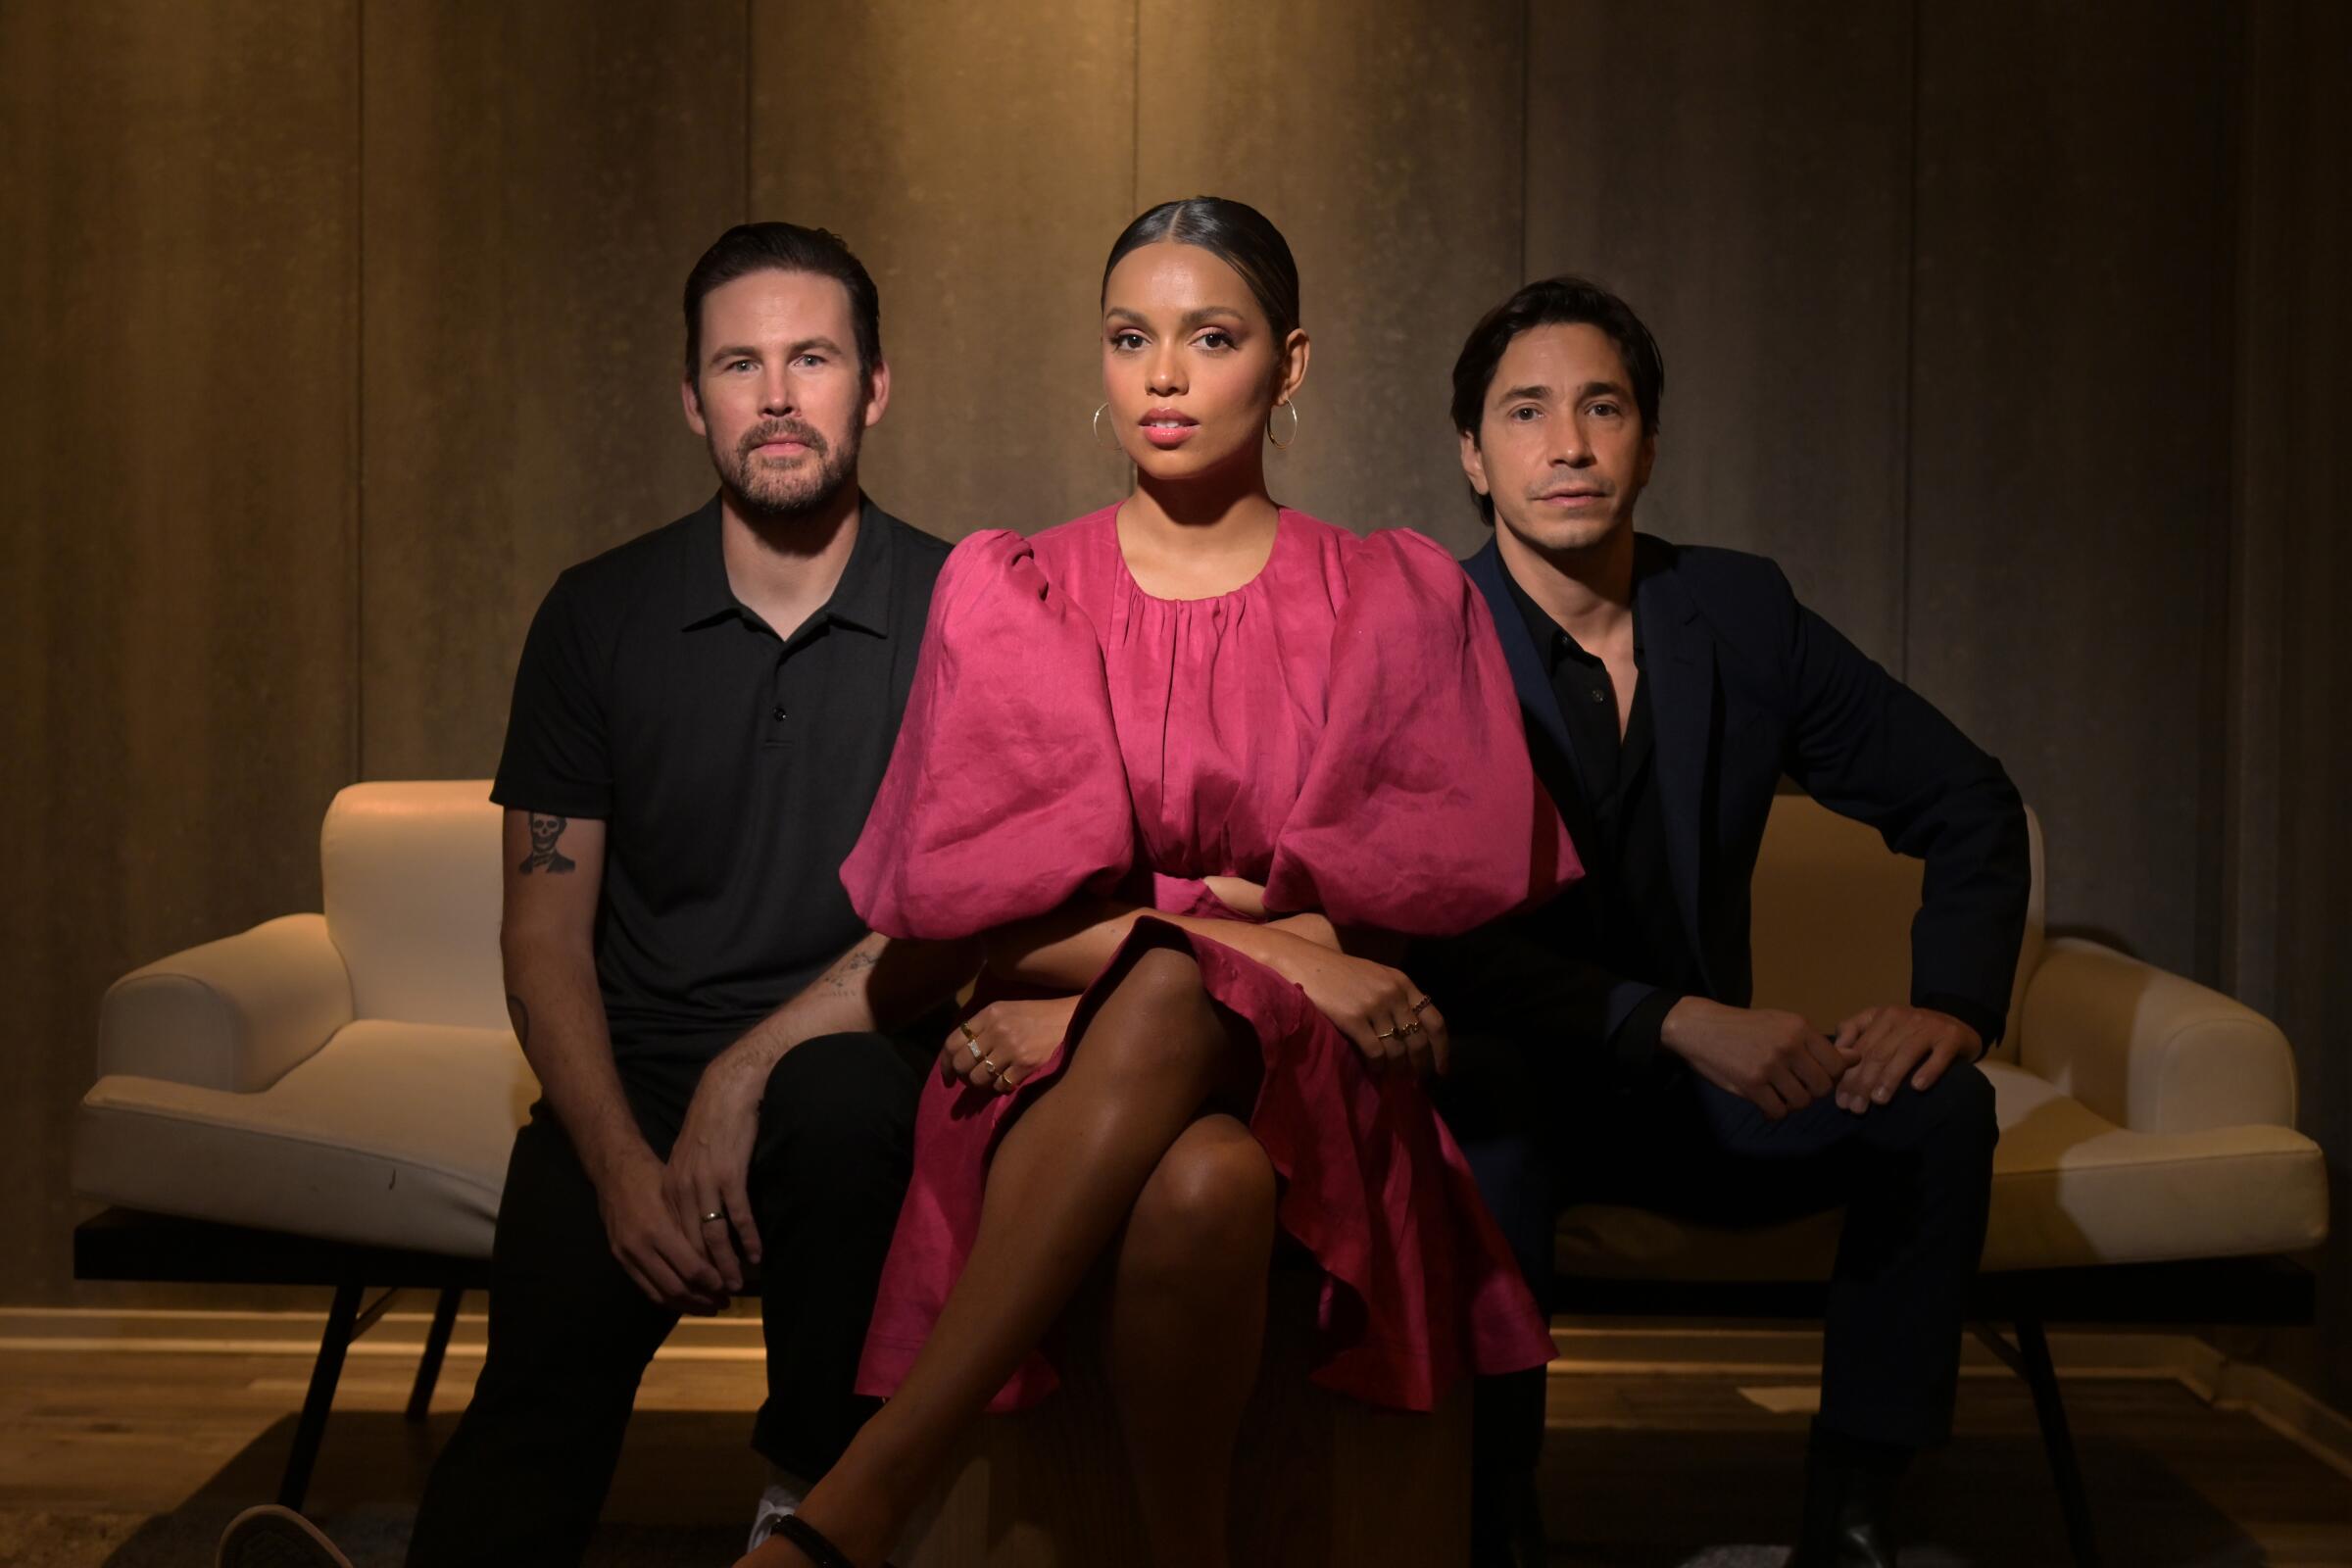 In a portrait in a subtly lit room, a woman in a red dress is flanked by two men in black.